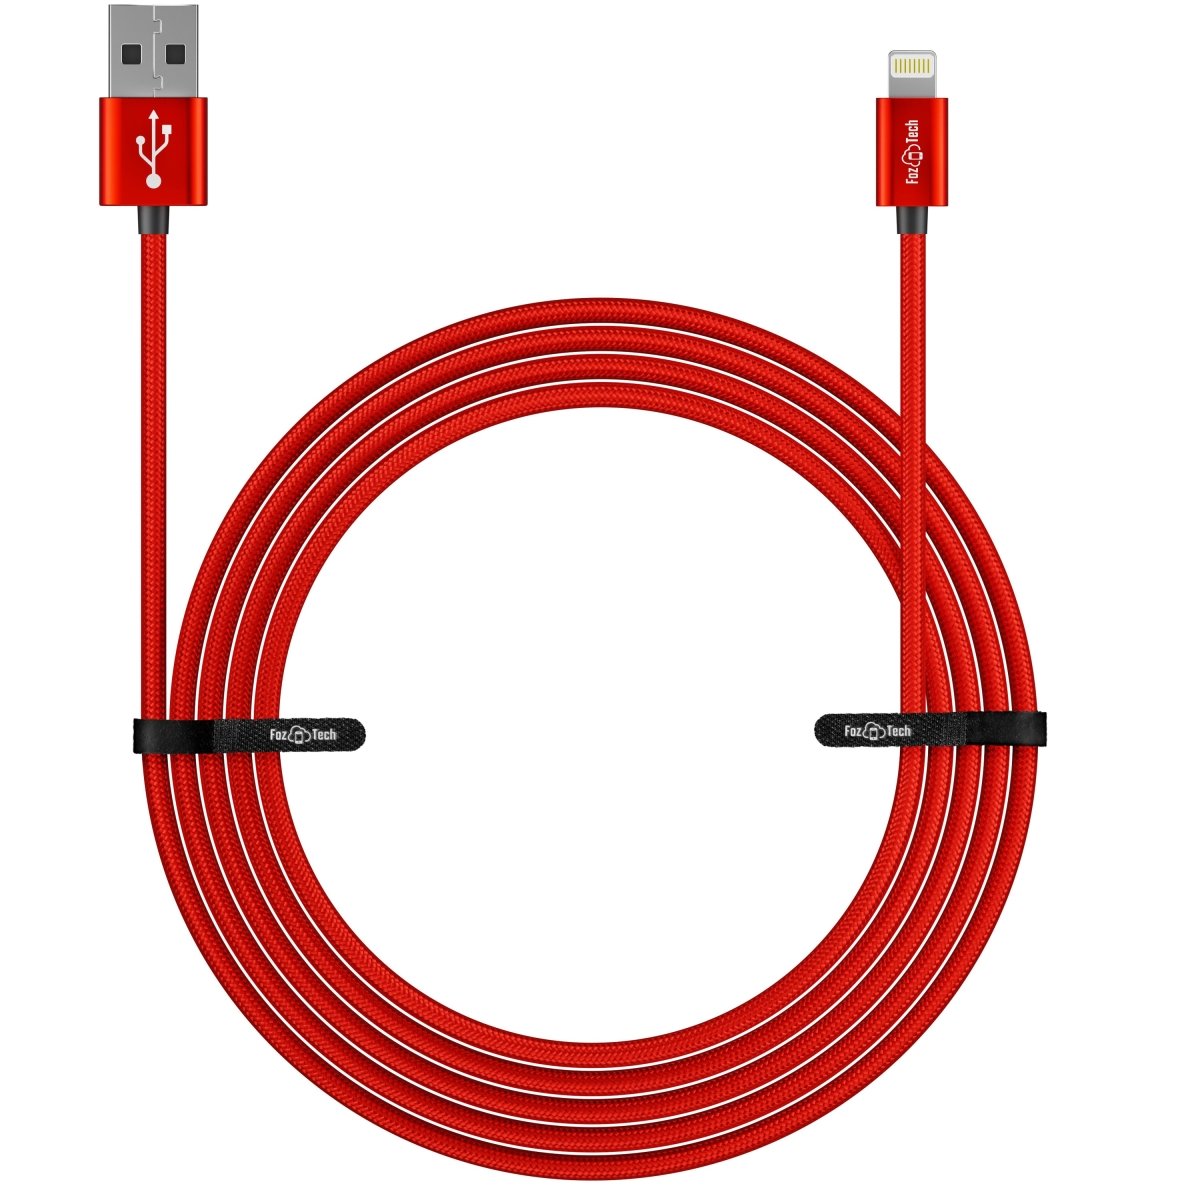 FozTech - CORE Series - USB Charger Cable Data Sync Lead for iPhone, iPad, iPod - Red - USB Cable - FozTech Official Store